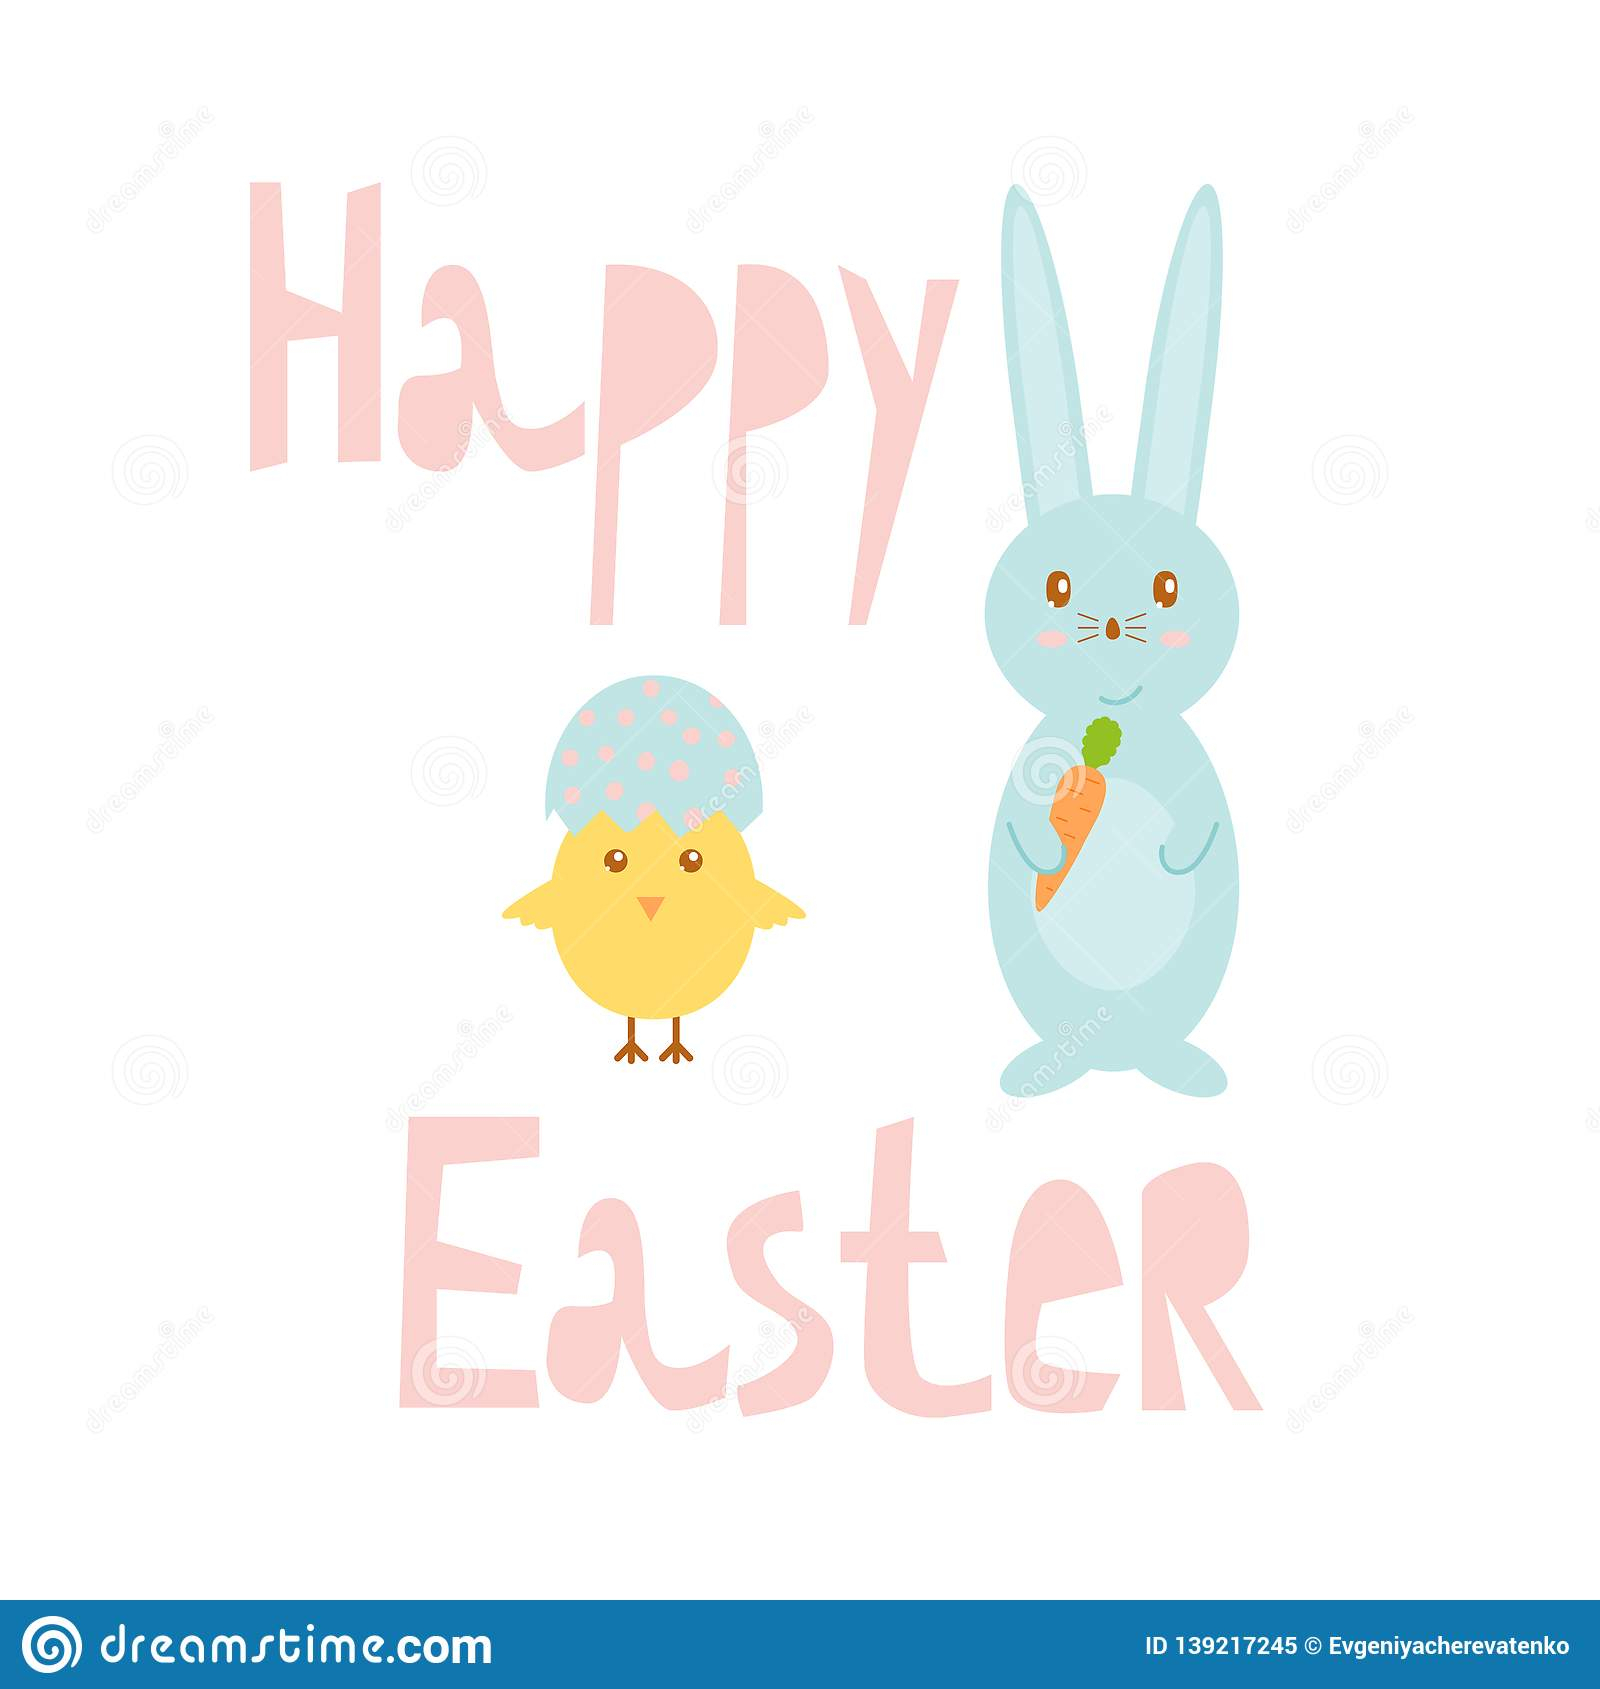 Happy Easter Greeting Card Template With Bunny And Chick In Easter Chick Card Template